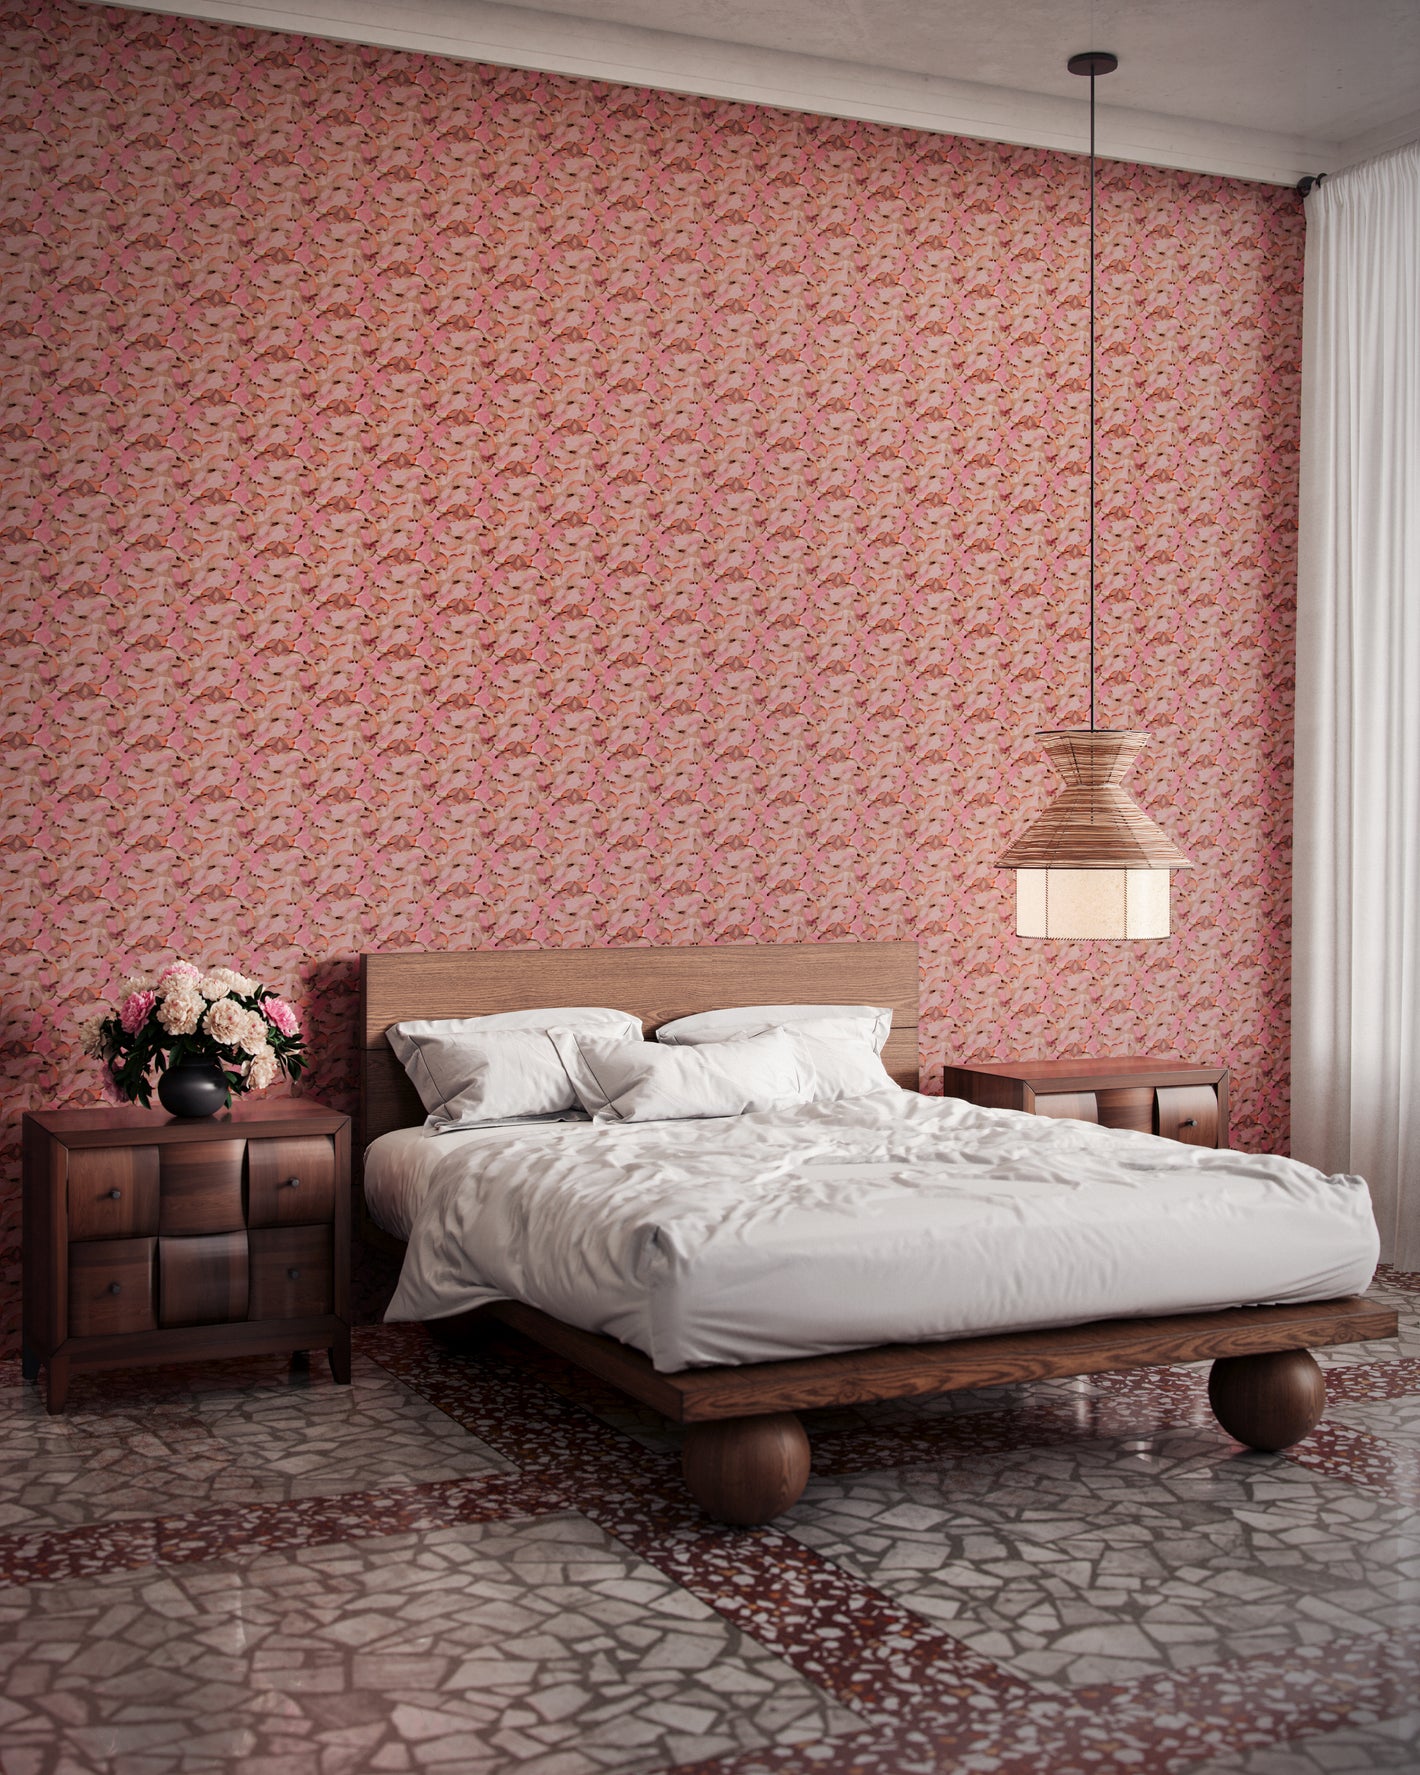 Orbs wallpaper in flamingo in a bedroom with a large bed, low hanging ceiling light, and two side tables.